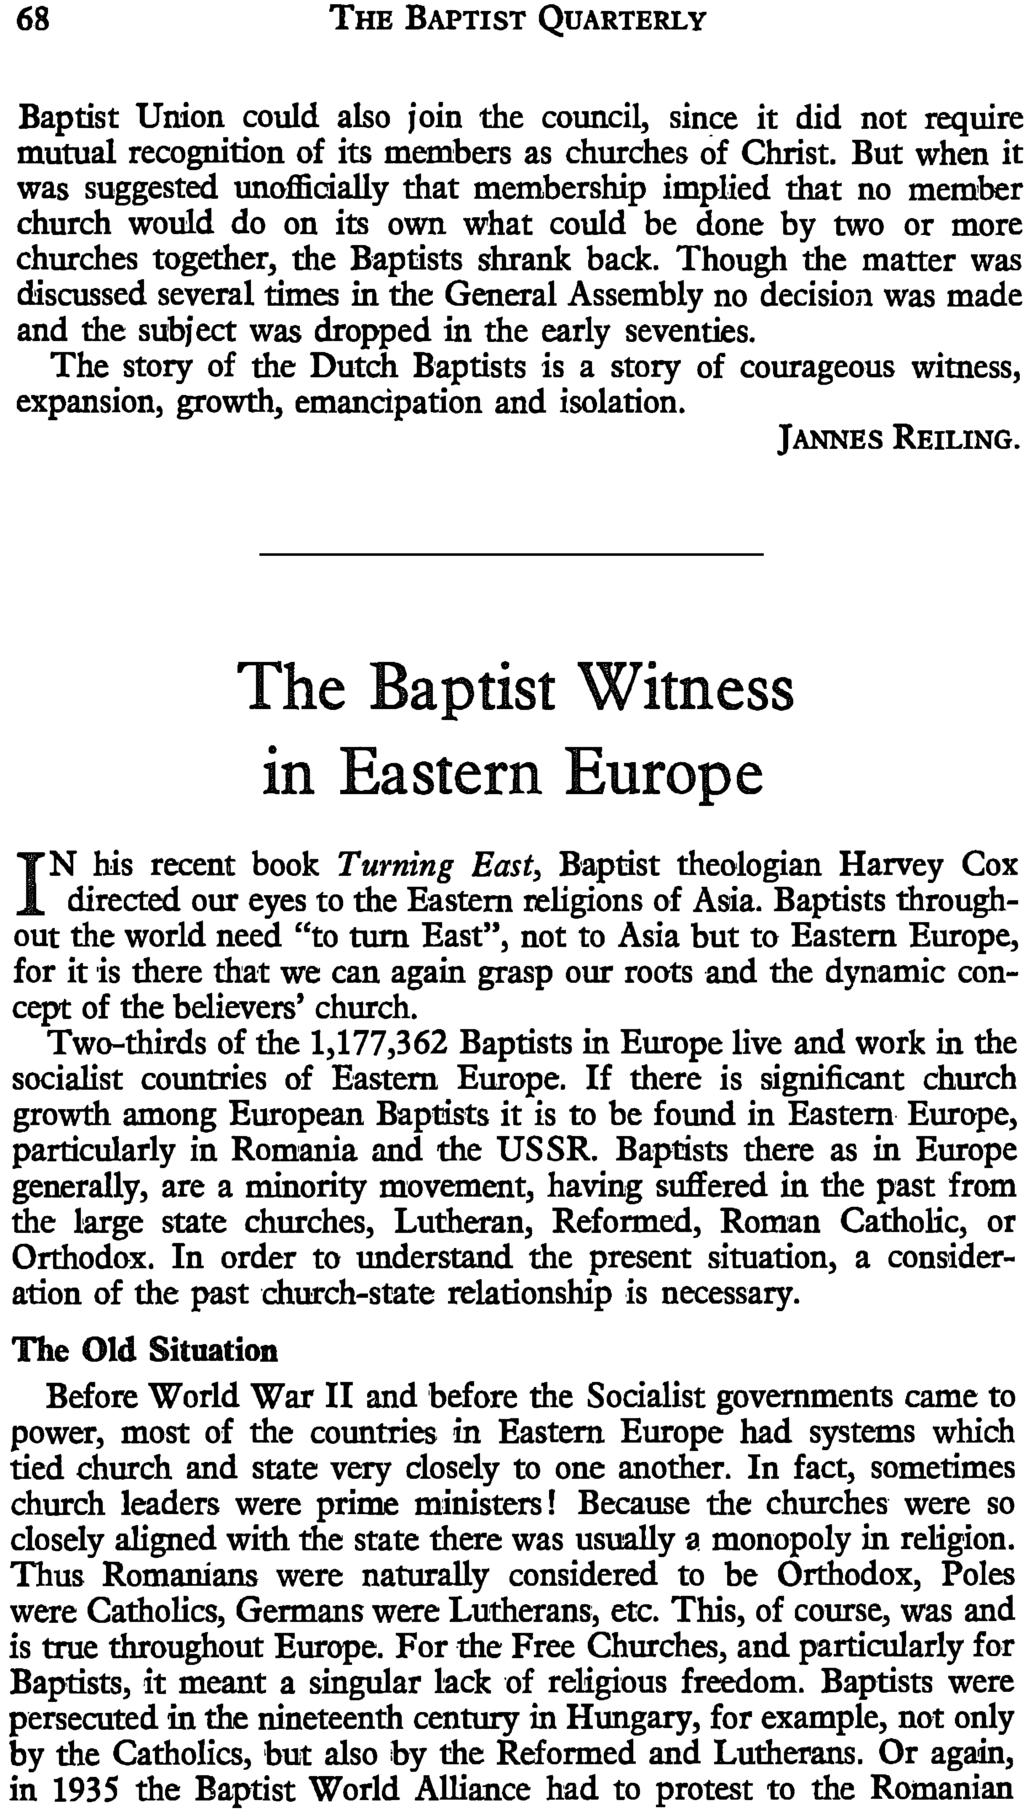 68 THE BAPTIST QUARTERLY Baptist Union could also join the council, since it did not require mutual recognition of its members as churches of Christ.